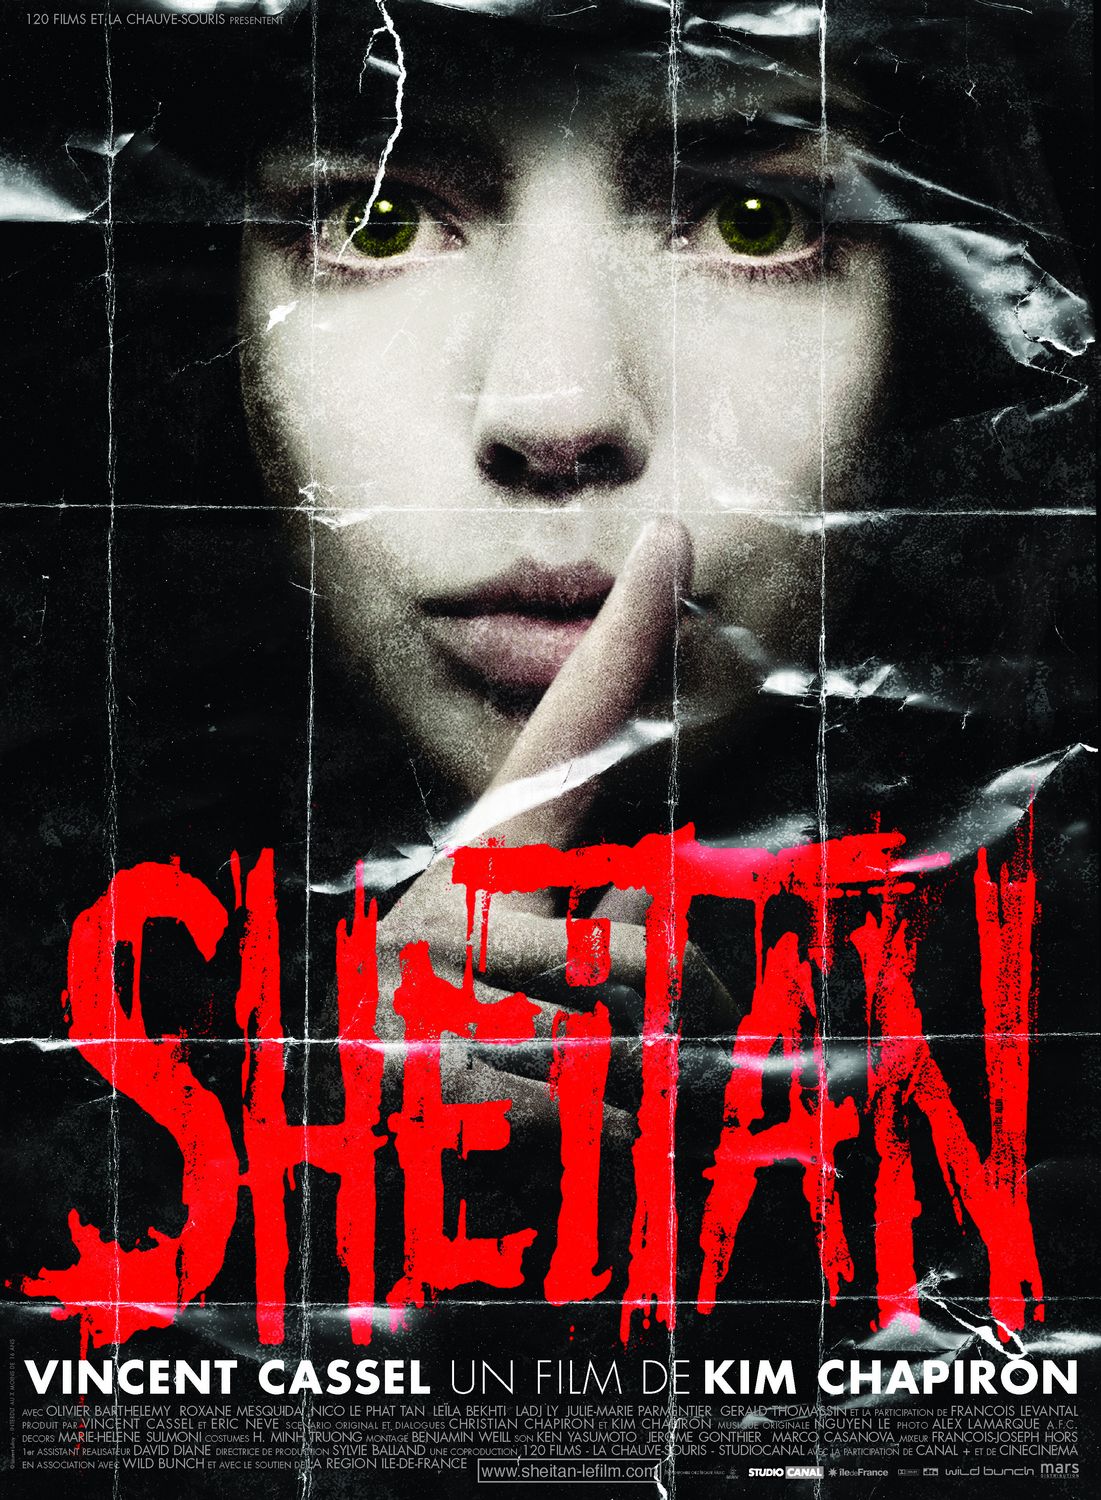 Extra Large Movie Poster Image for Sheitan (#5 of 5)